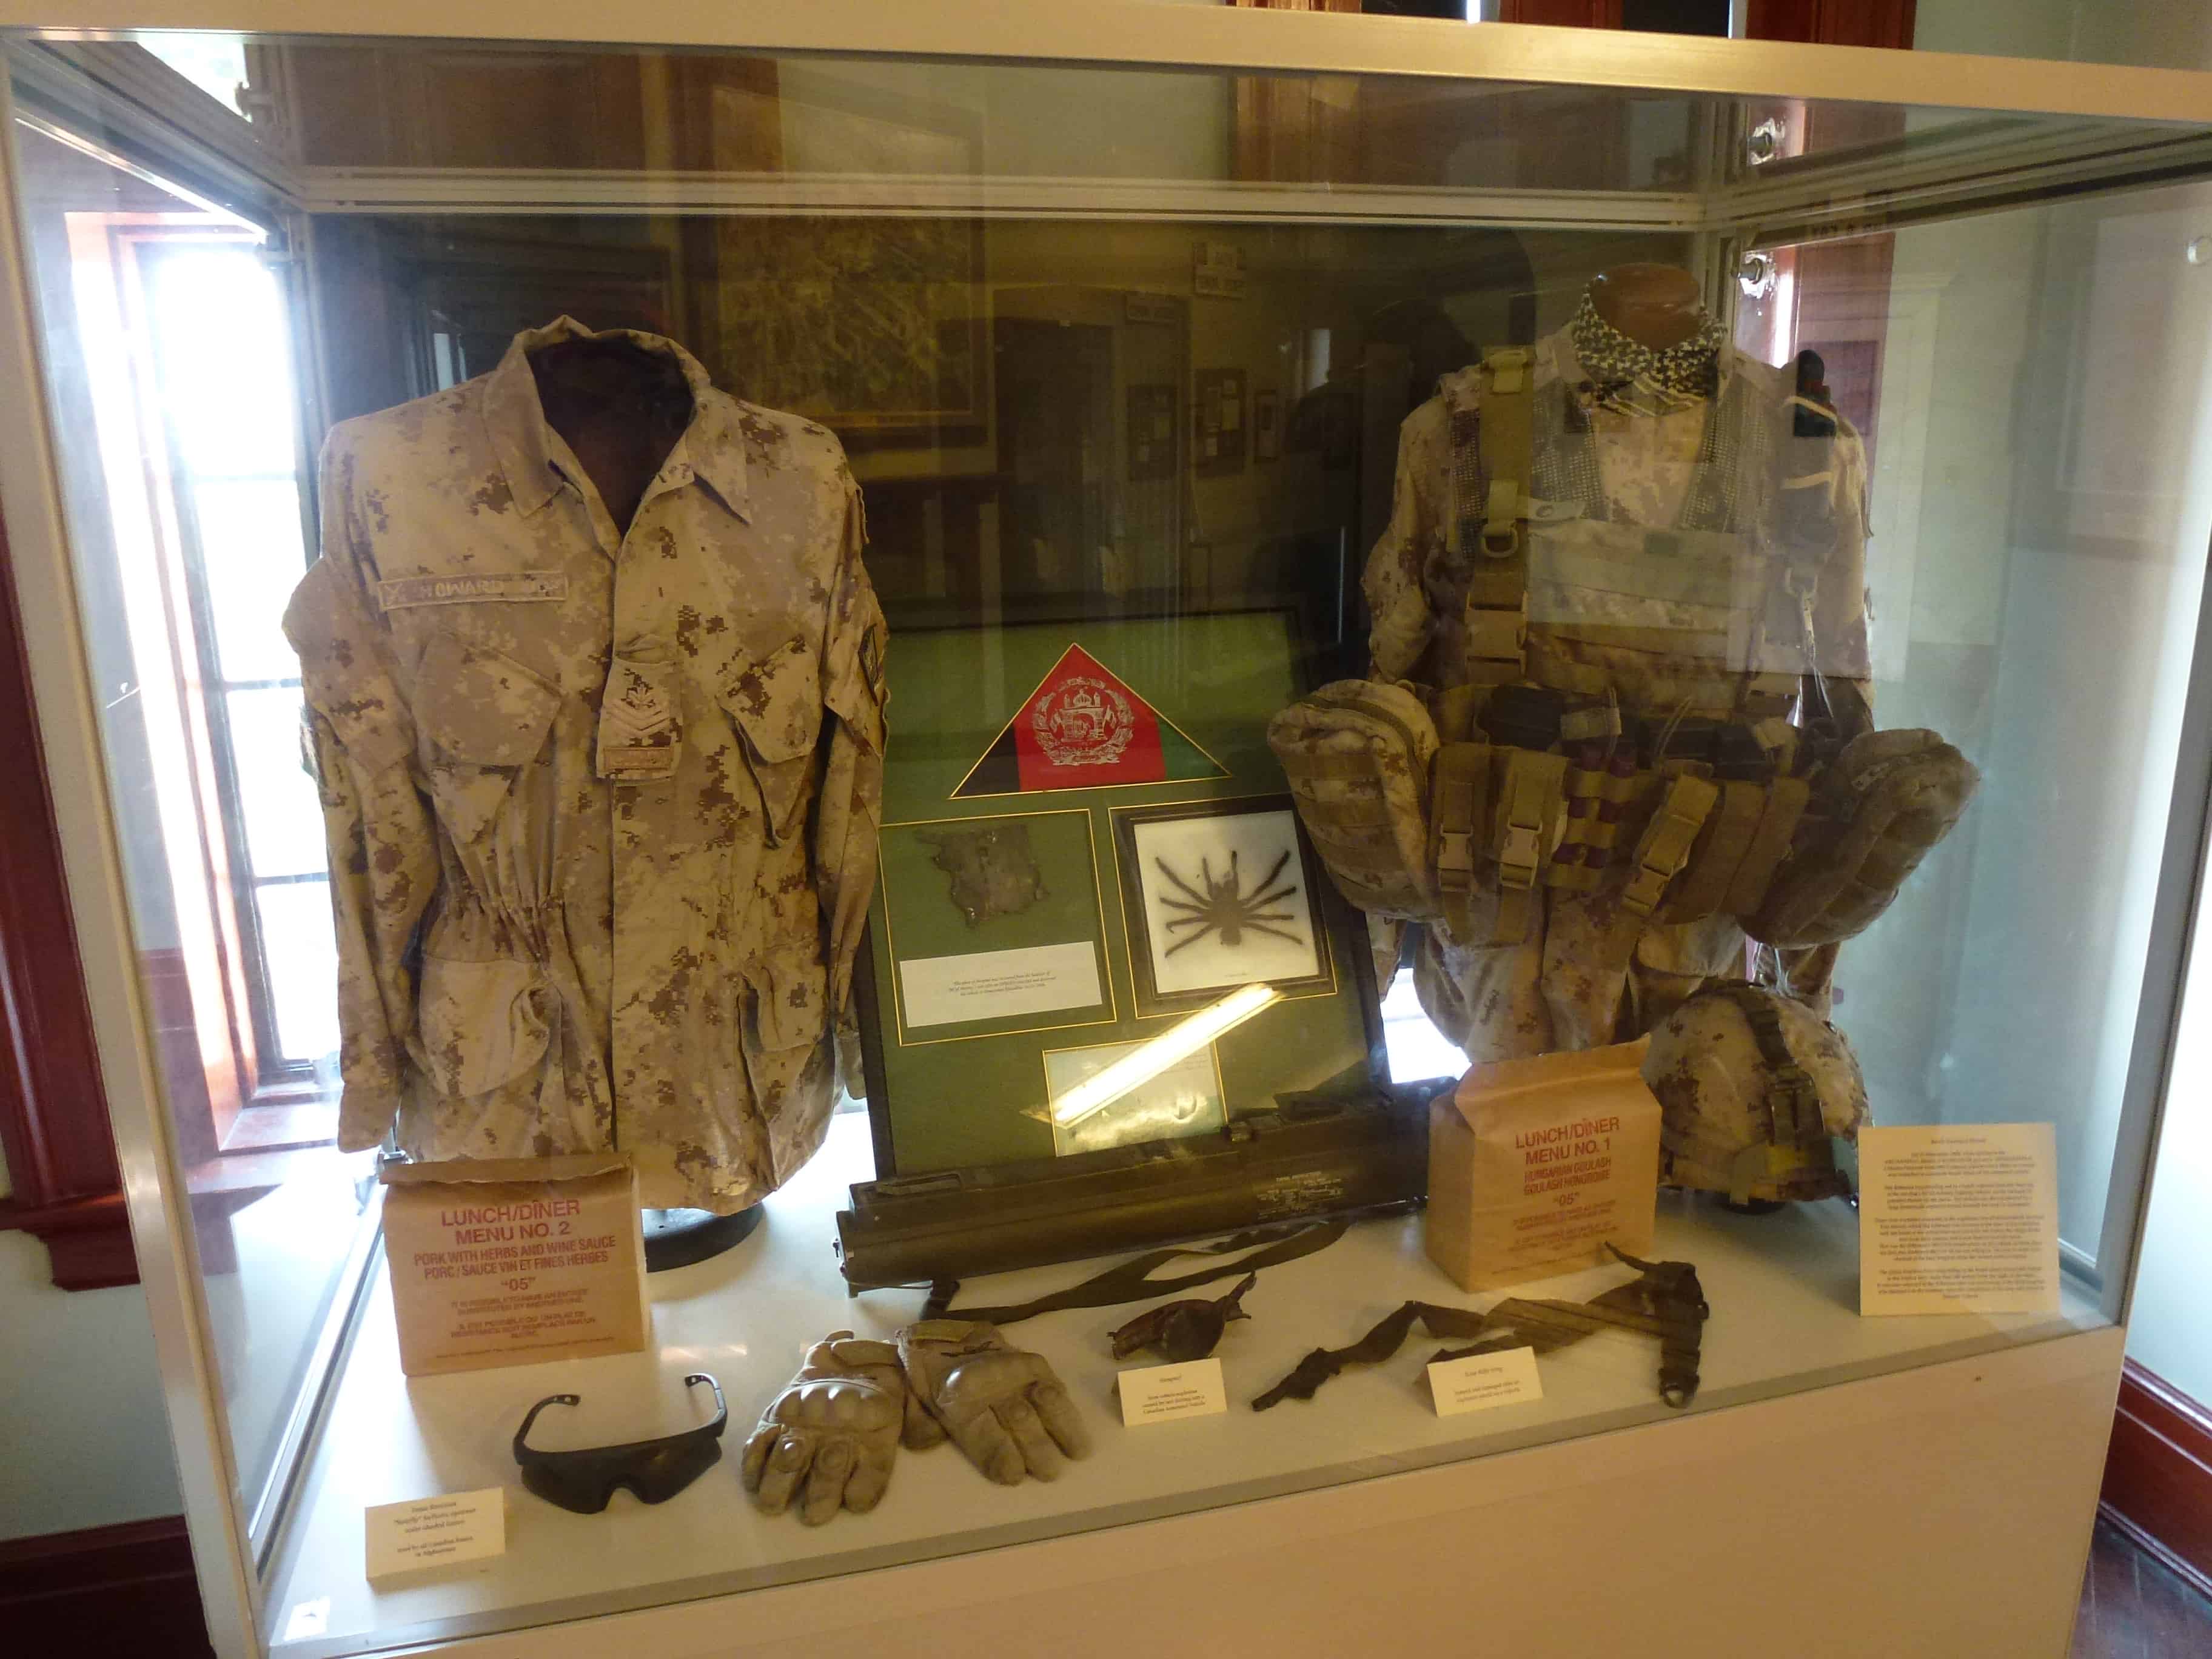 Queen's Own Rifles Museum at Casa Loma in Toronto, Ontario, Canada